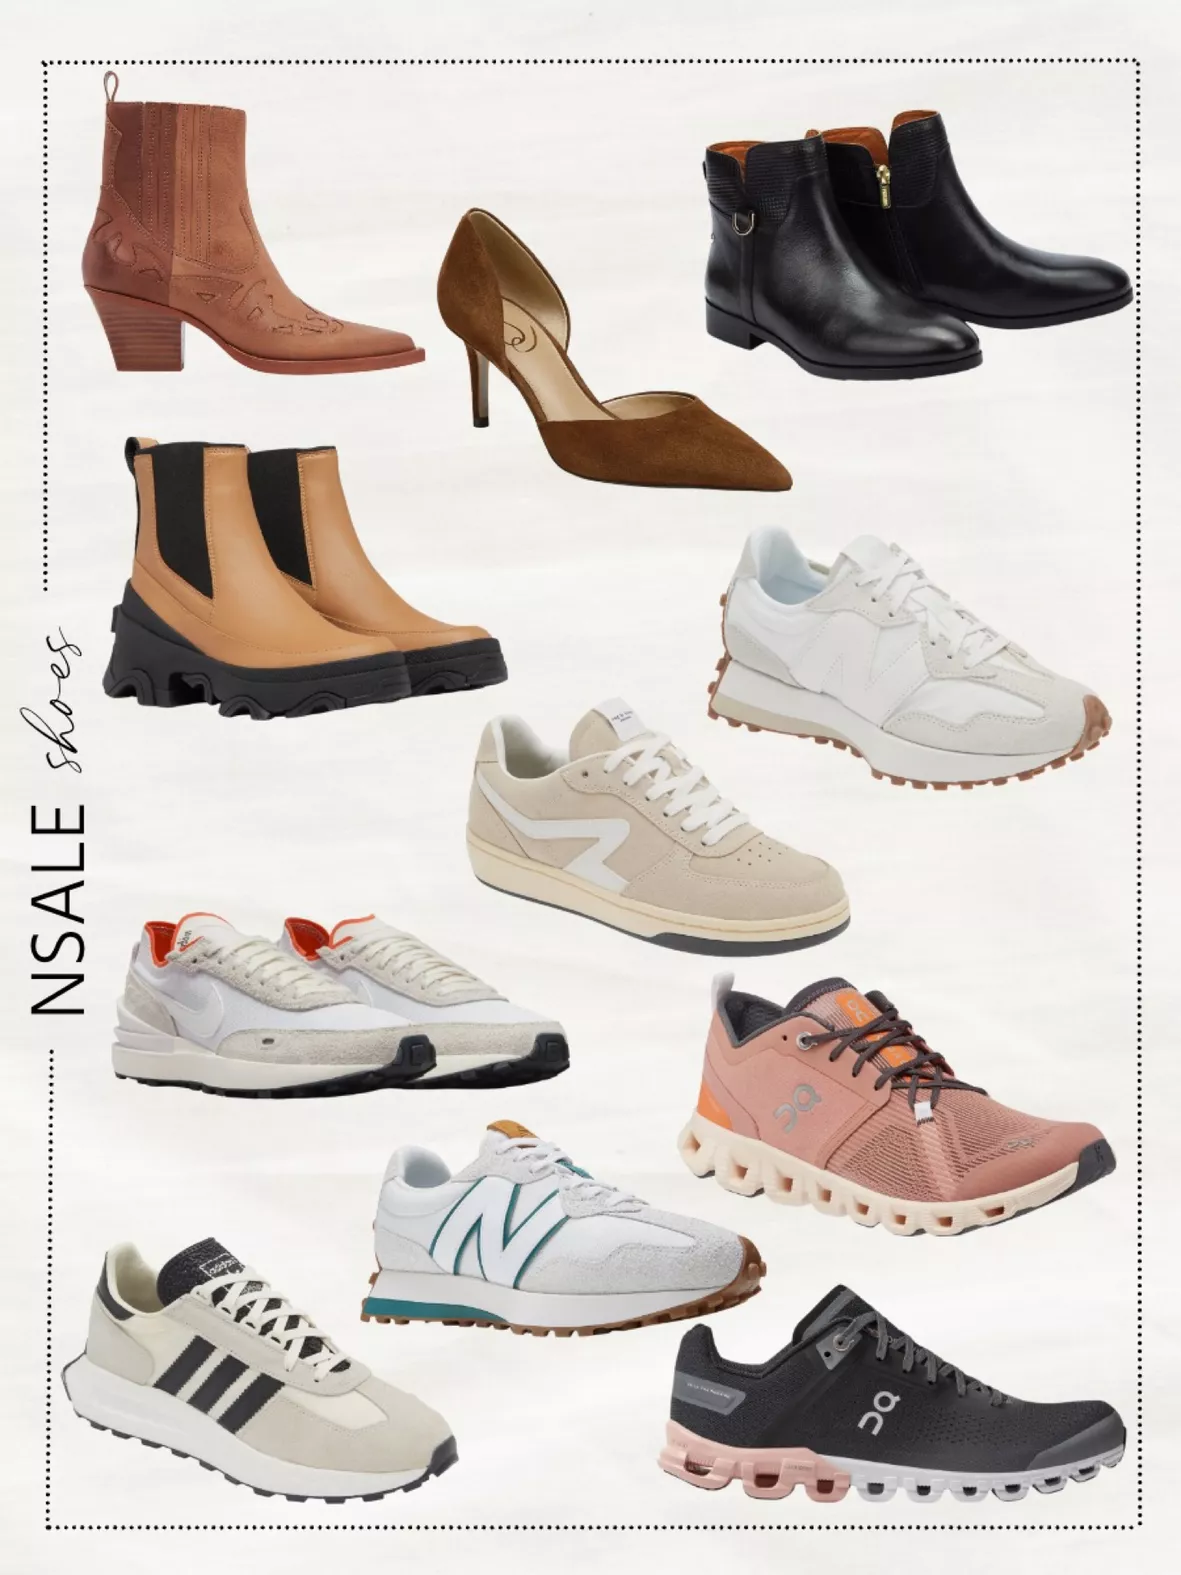 Women's Shoes, Boots, Trainers & Heels